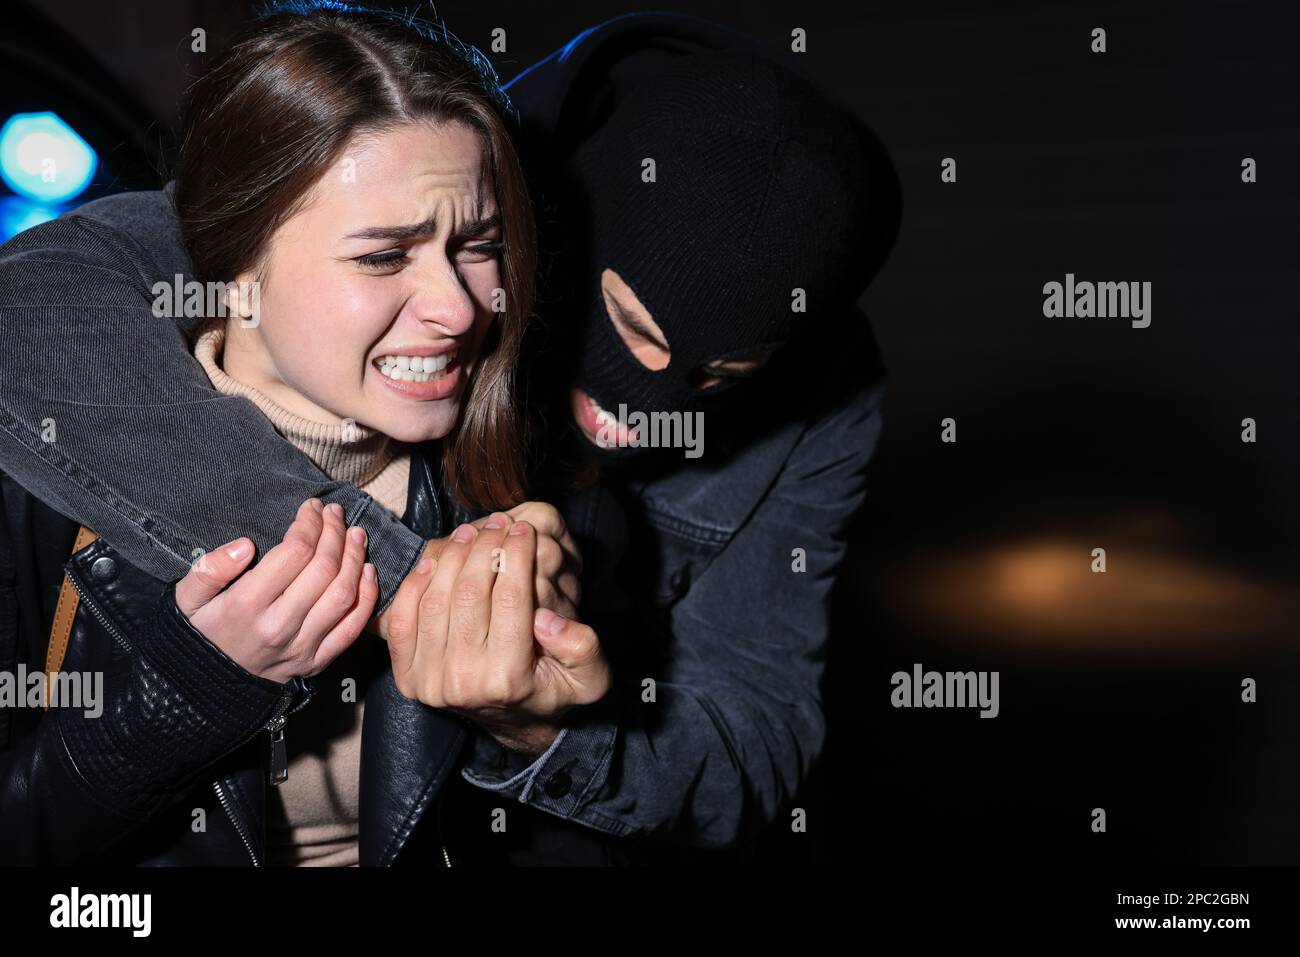 Woman defending herself from attacker outdoors at night Stock Photo